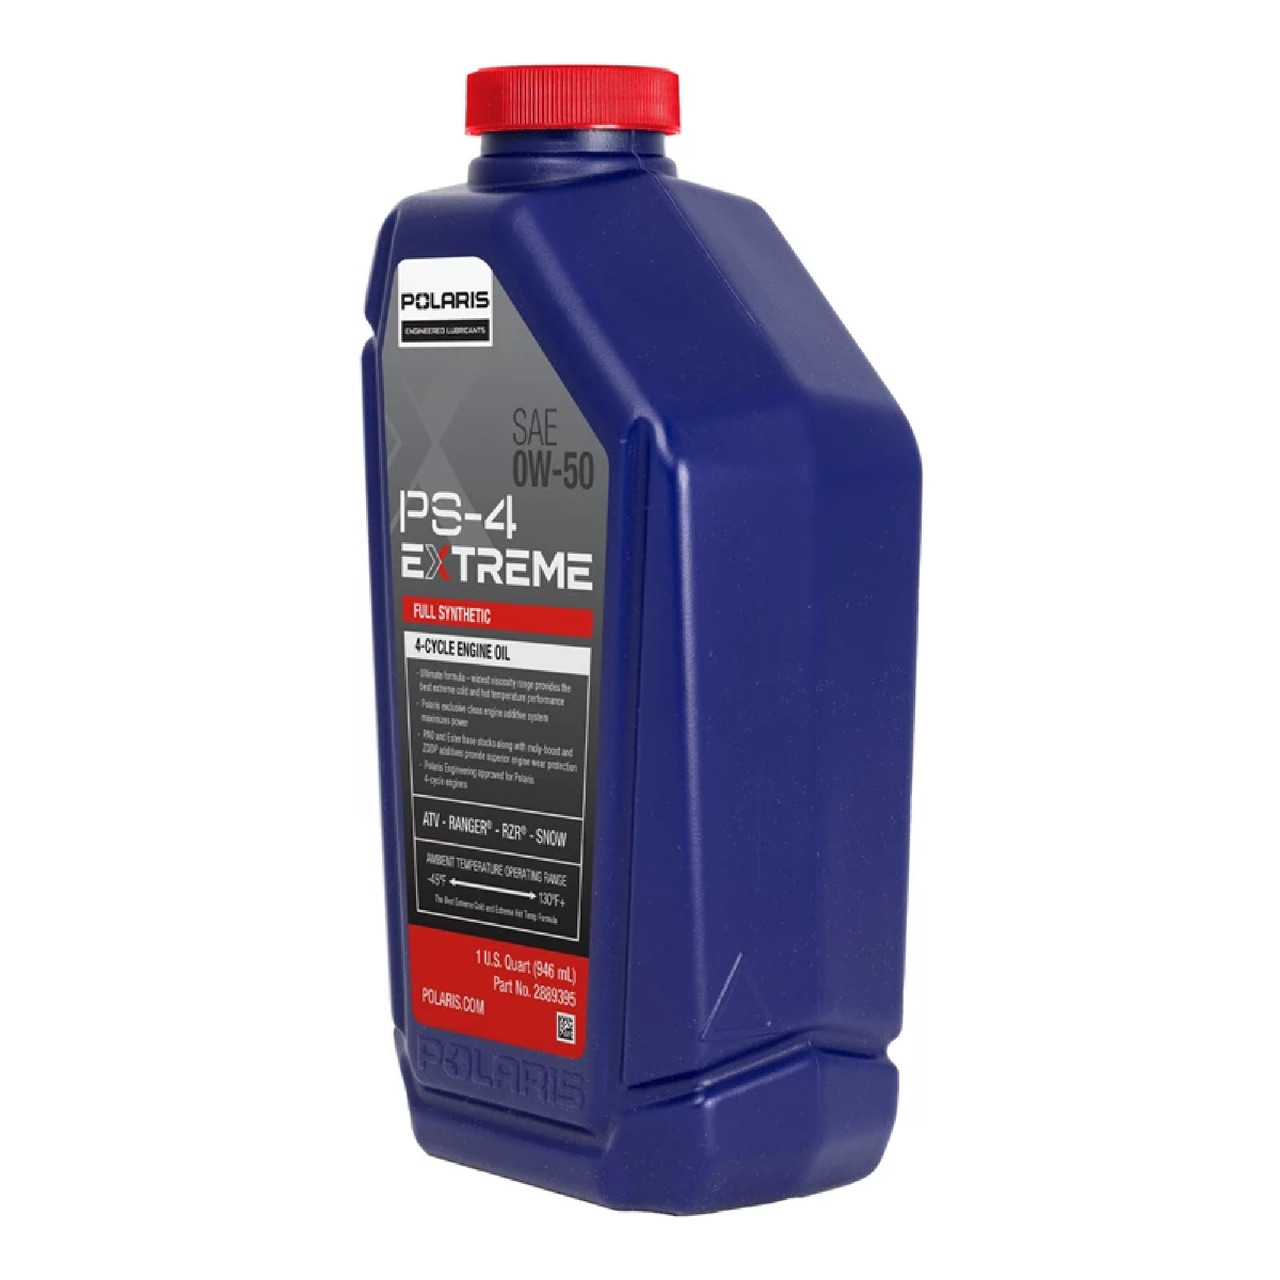 Polaris New OEM PS-4 Extreme Full Synthetic 0W-50 Engine Oil Quart, Pack of 6, 2889395